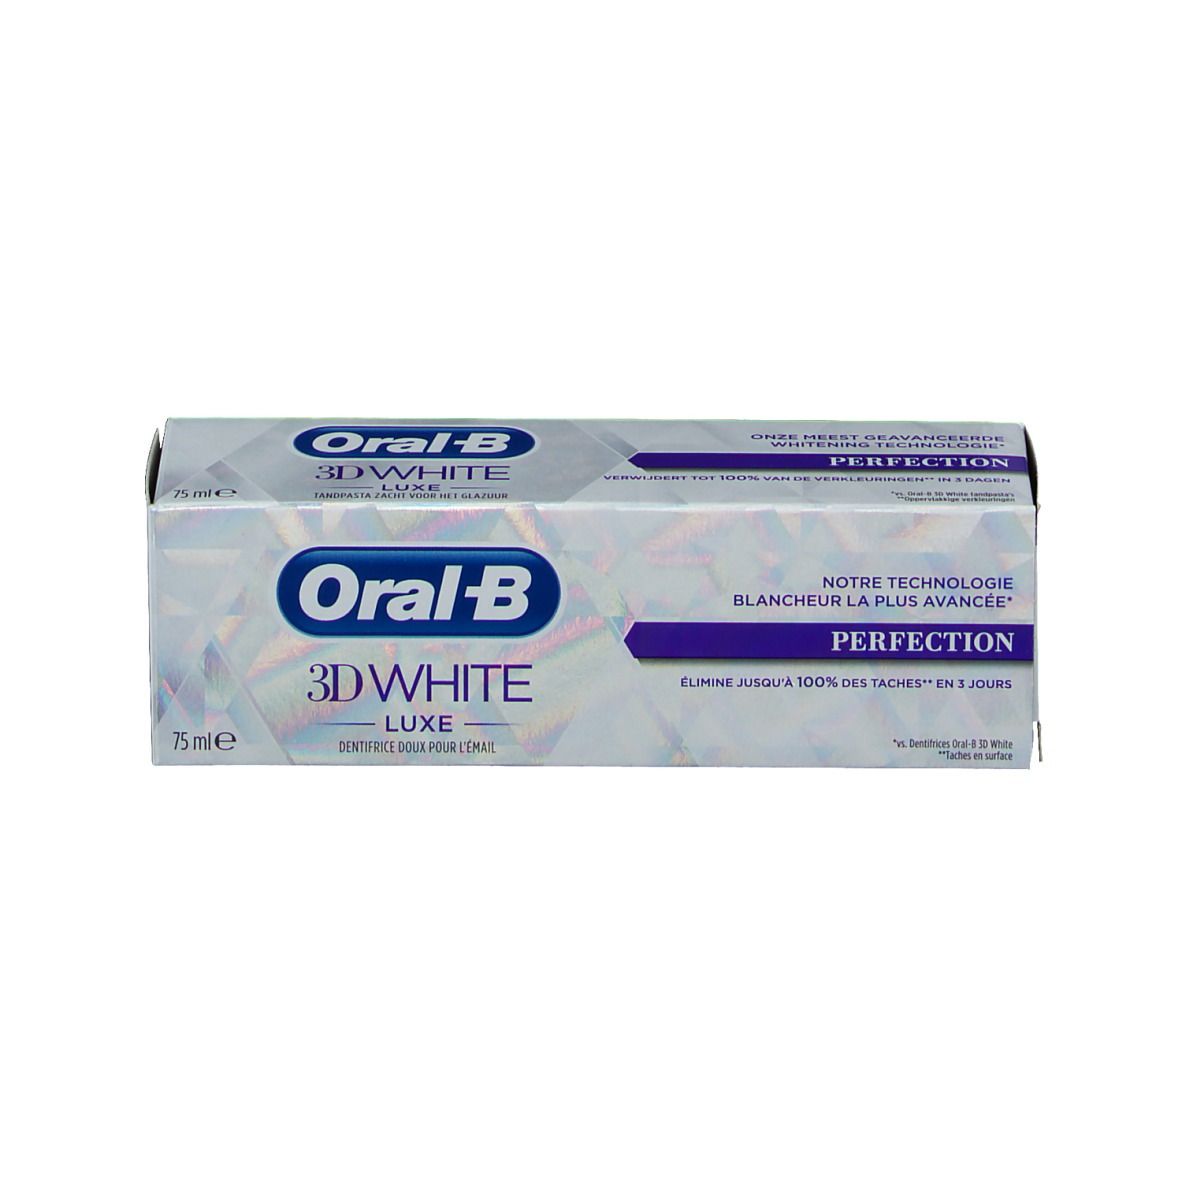 Oral-B 3D White Luxe Perfection Dentifrice